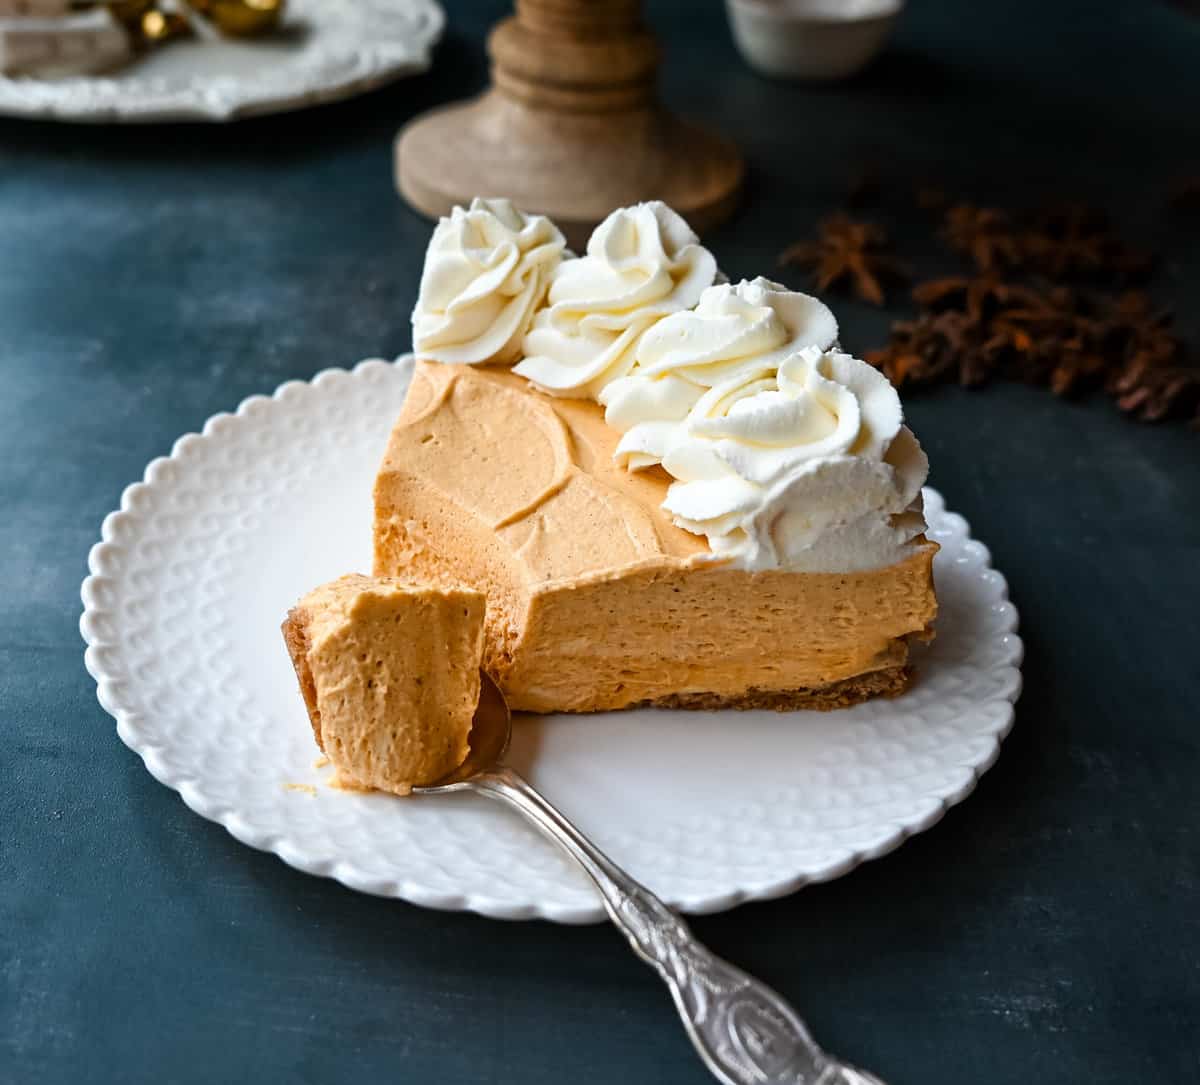 No-Bake Pumpkin Cheesecake. Creamy, smooth pumpkin cheesecake filling in a buttery graham cracker crust topped with whipped cream. This easy, no-bake dessert is perfect for Fall or Thanksgiving gatherings.